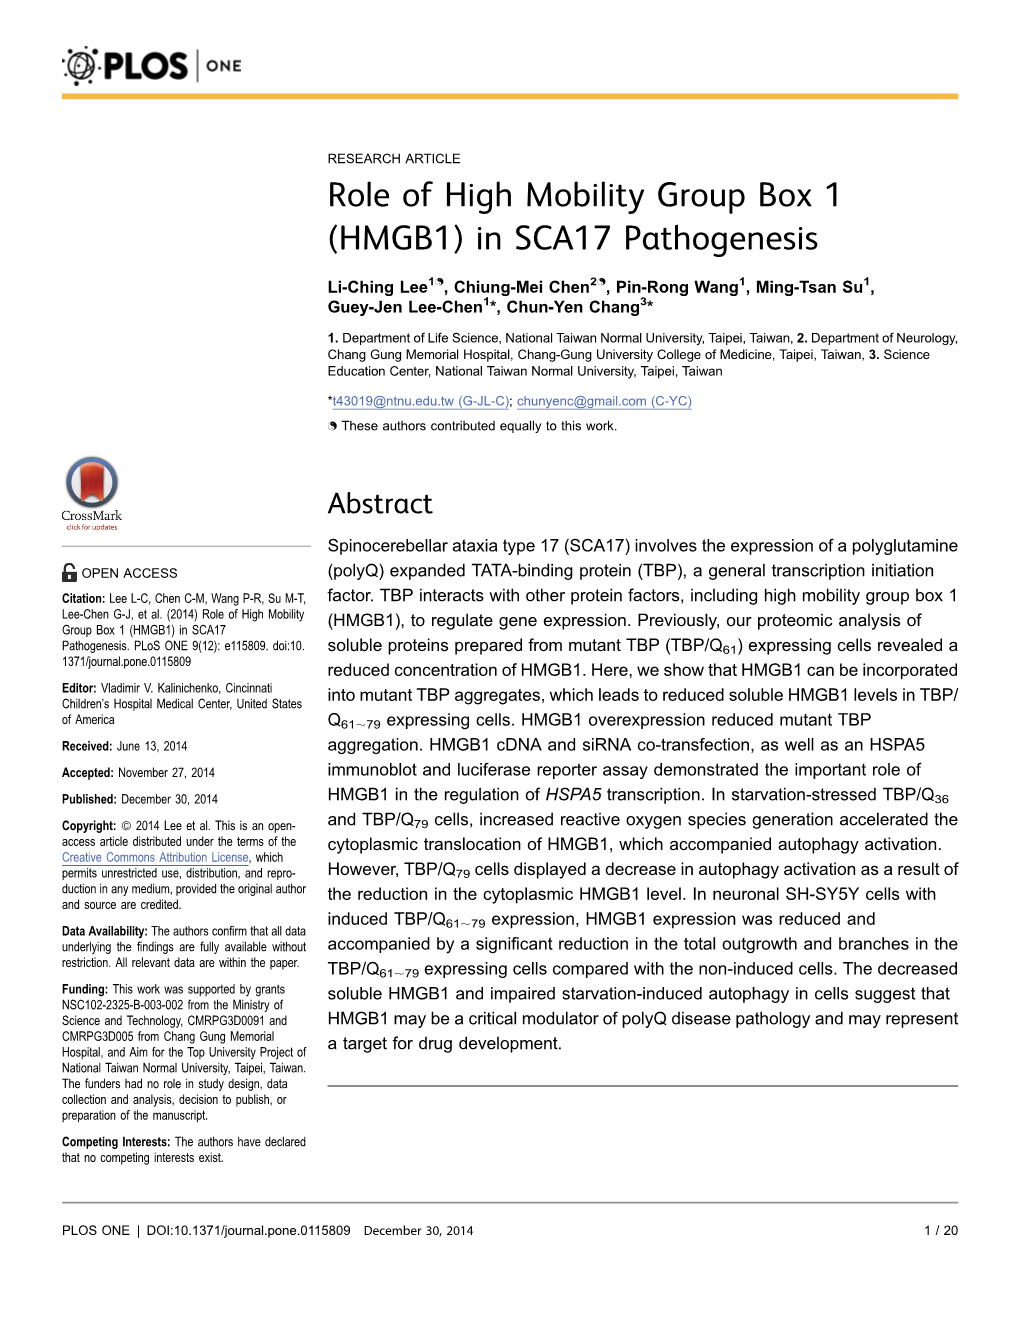 Role of High Mobility Group Box 1 (HMGB1) in SCA17 Pathogenesis